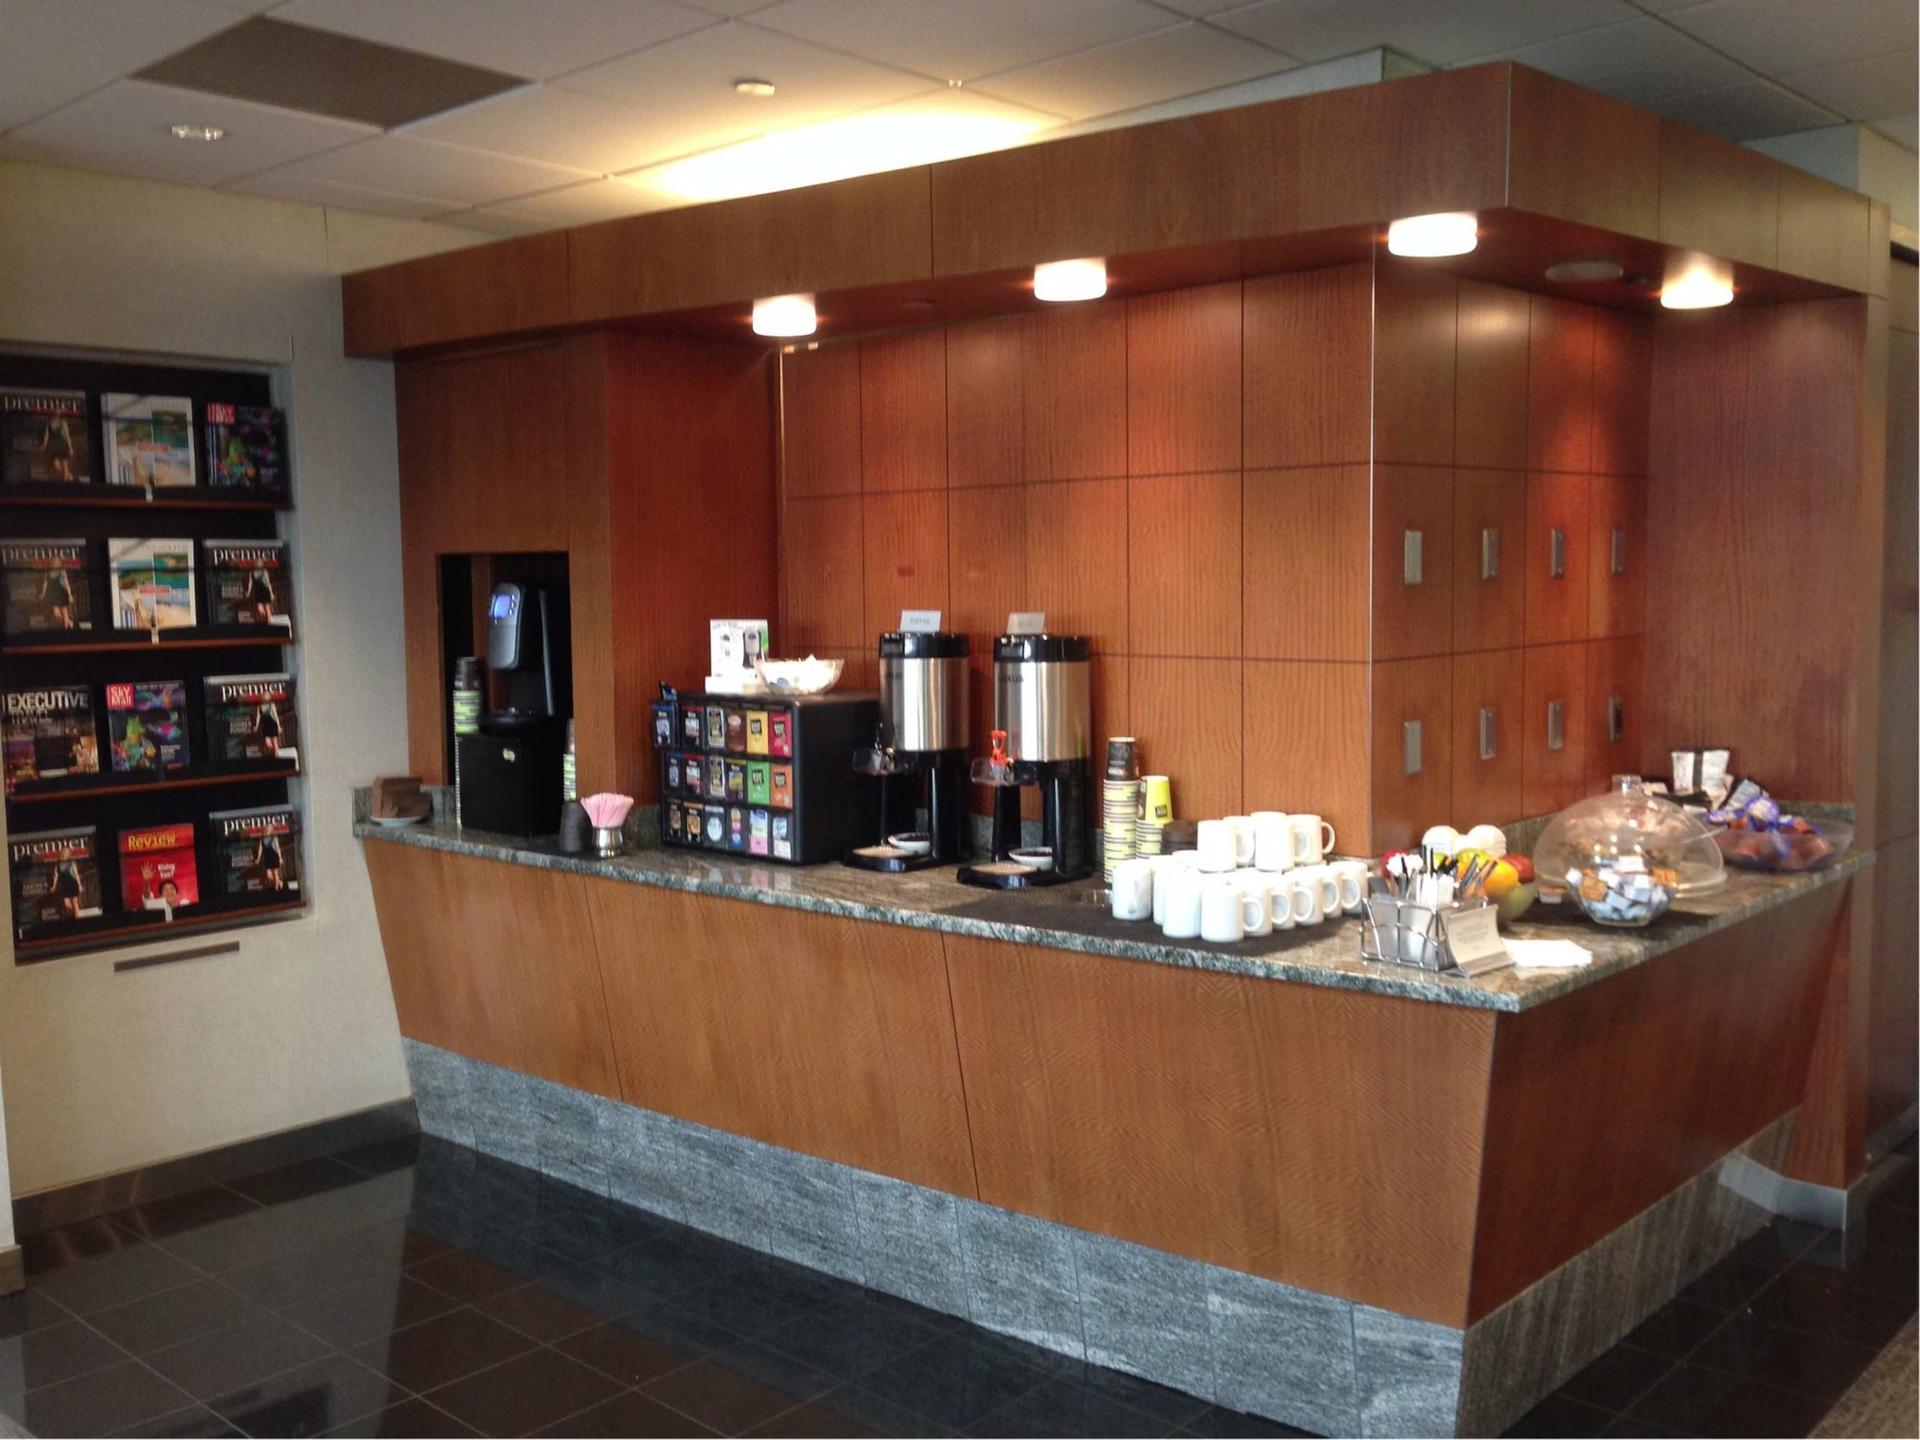 American Airlines Admirals Club image 33 of 48